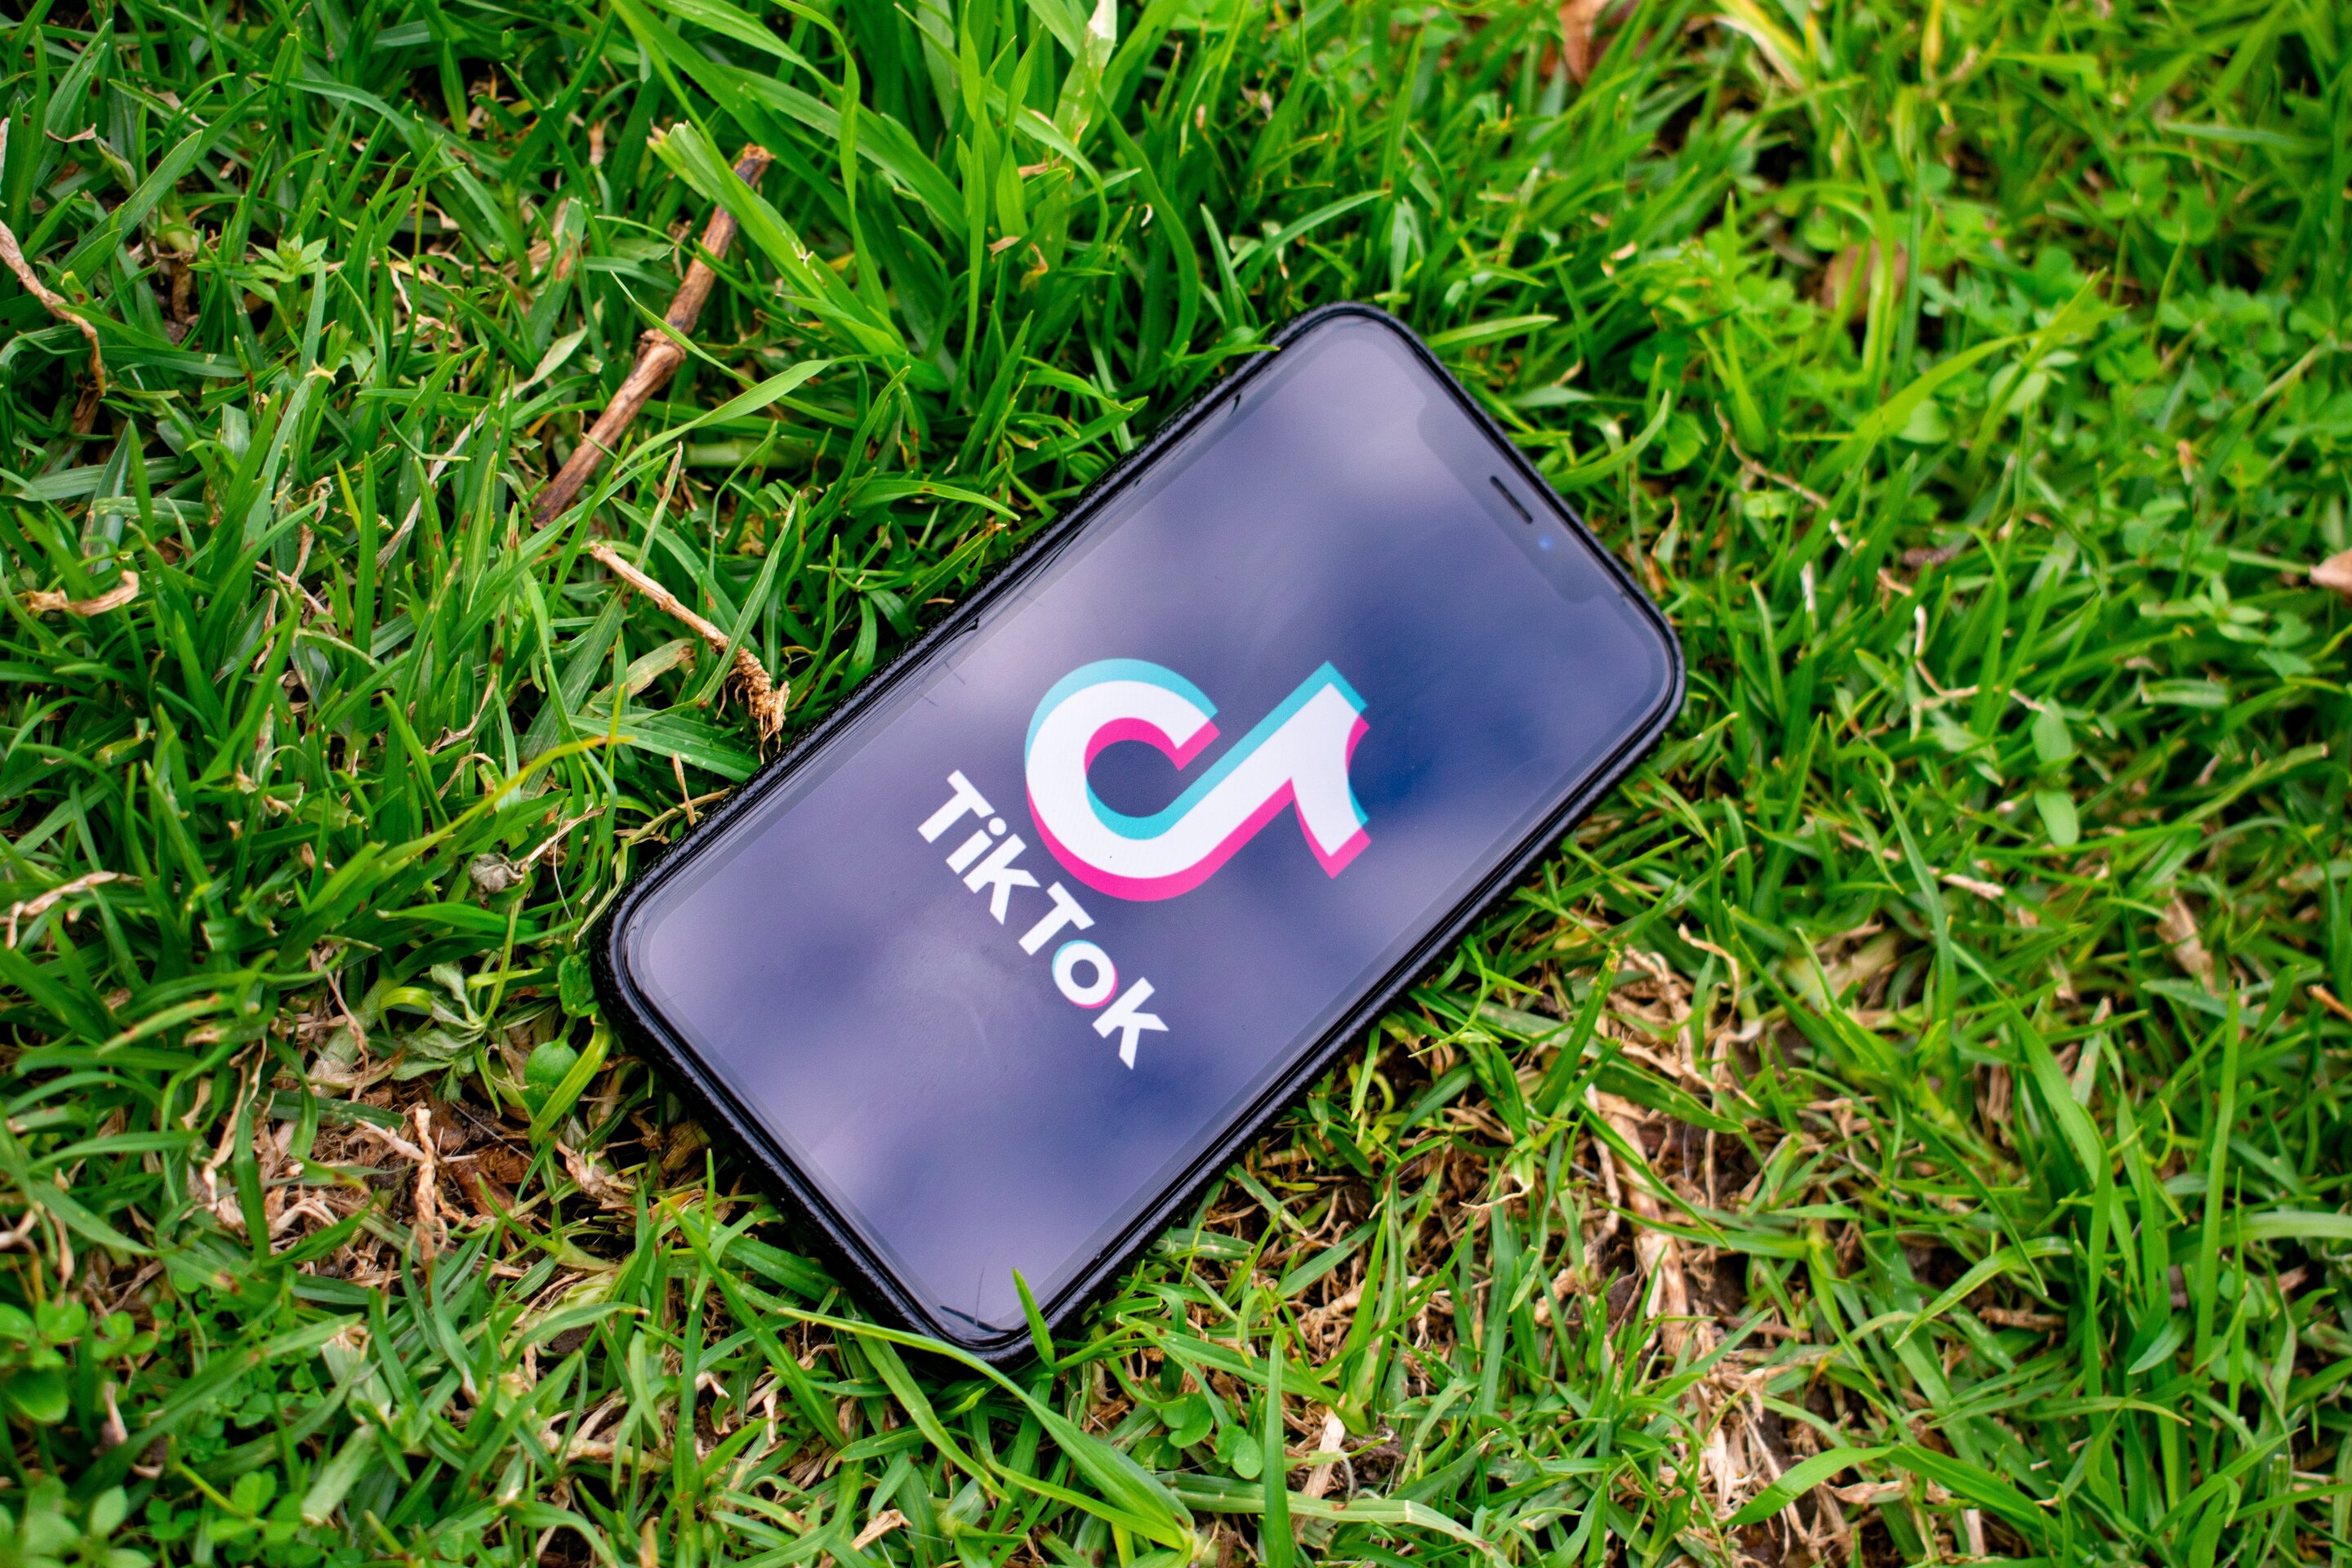 TikTok Found to Be Spreading Misinformation About COVID-19, According to Recent Study